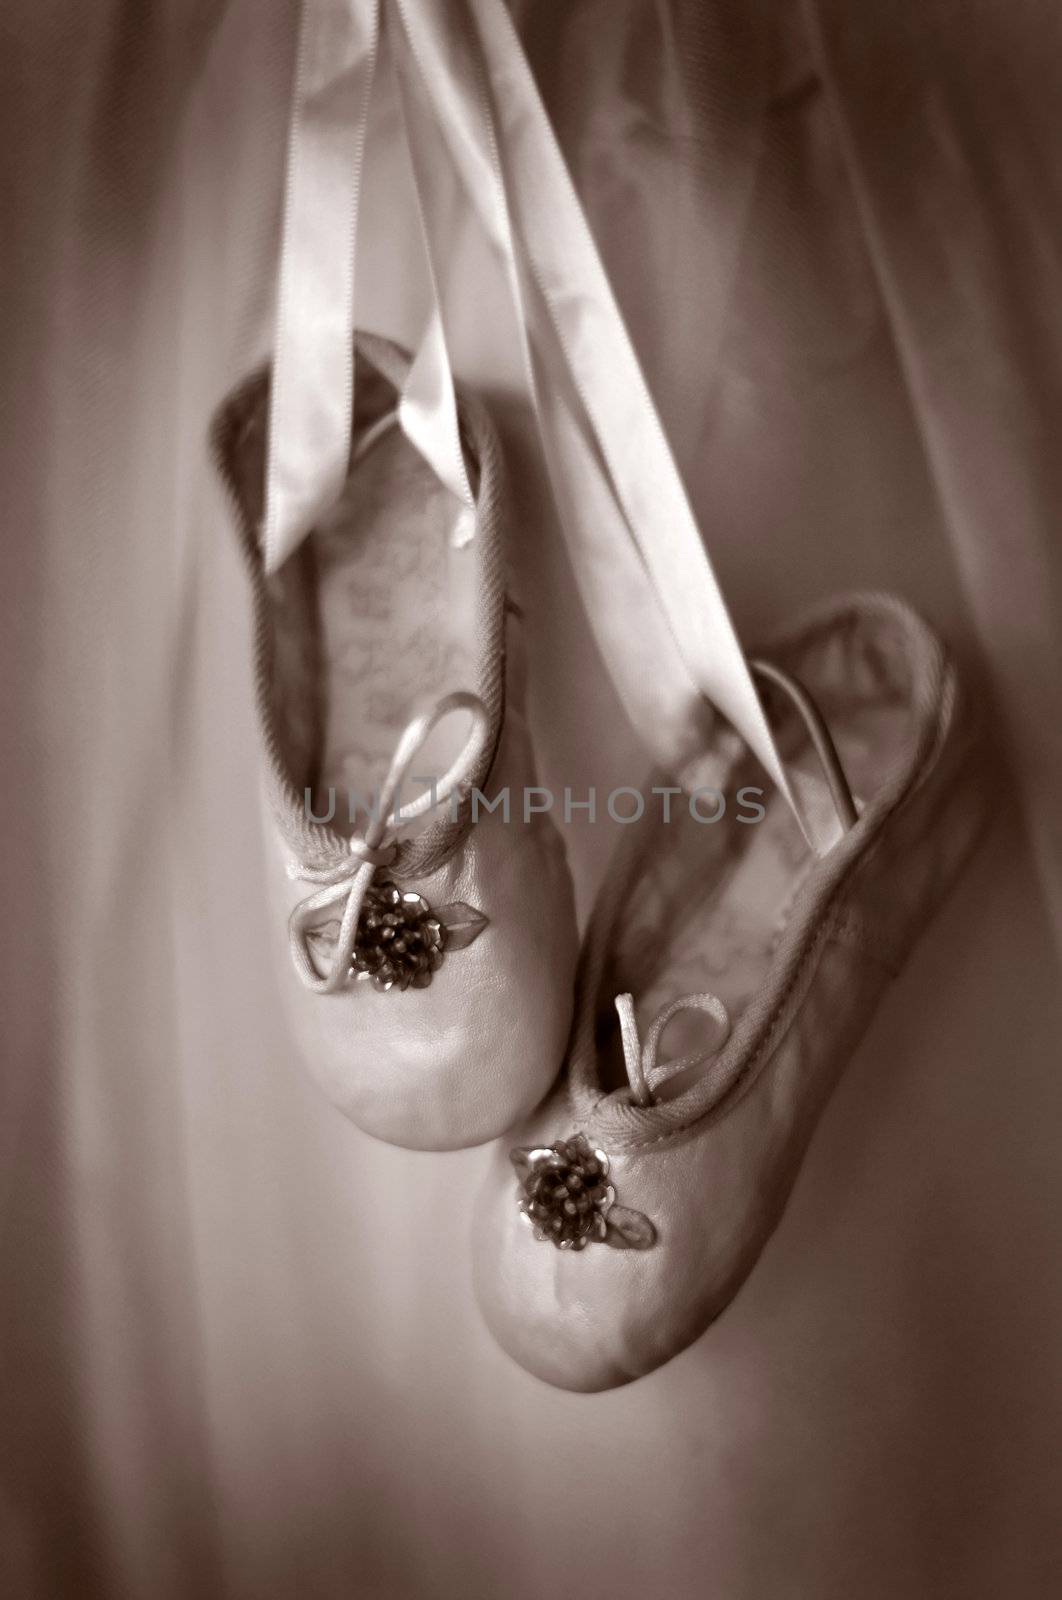 Image of dance or ballet slippers in sepia tone